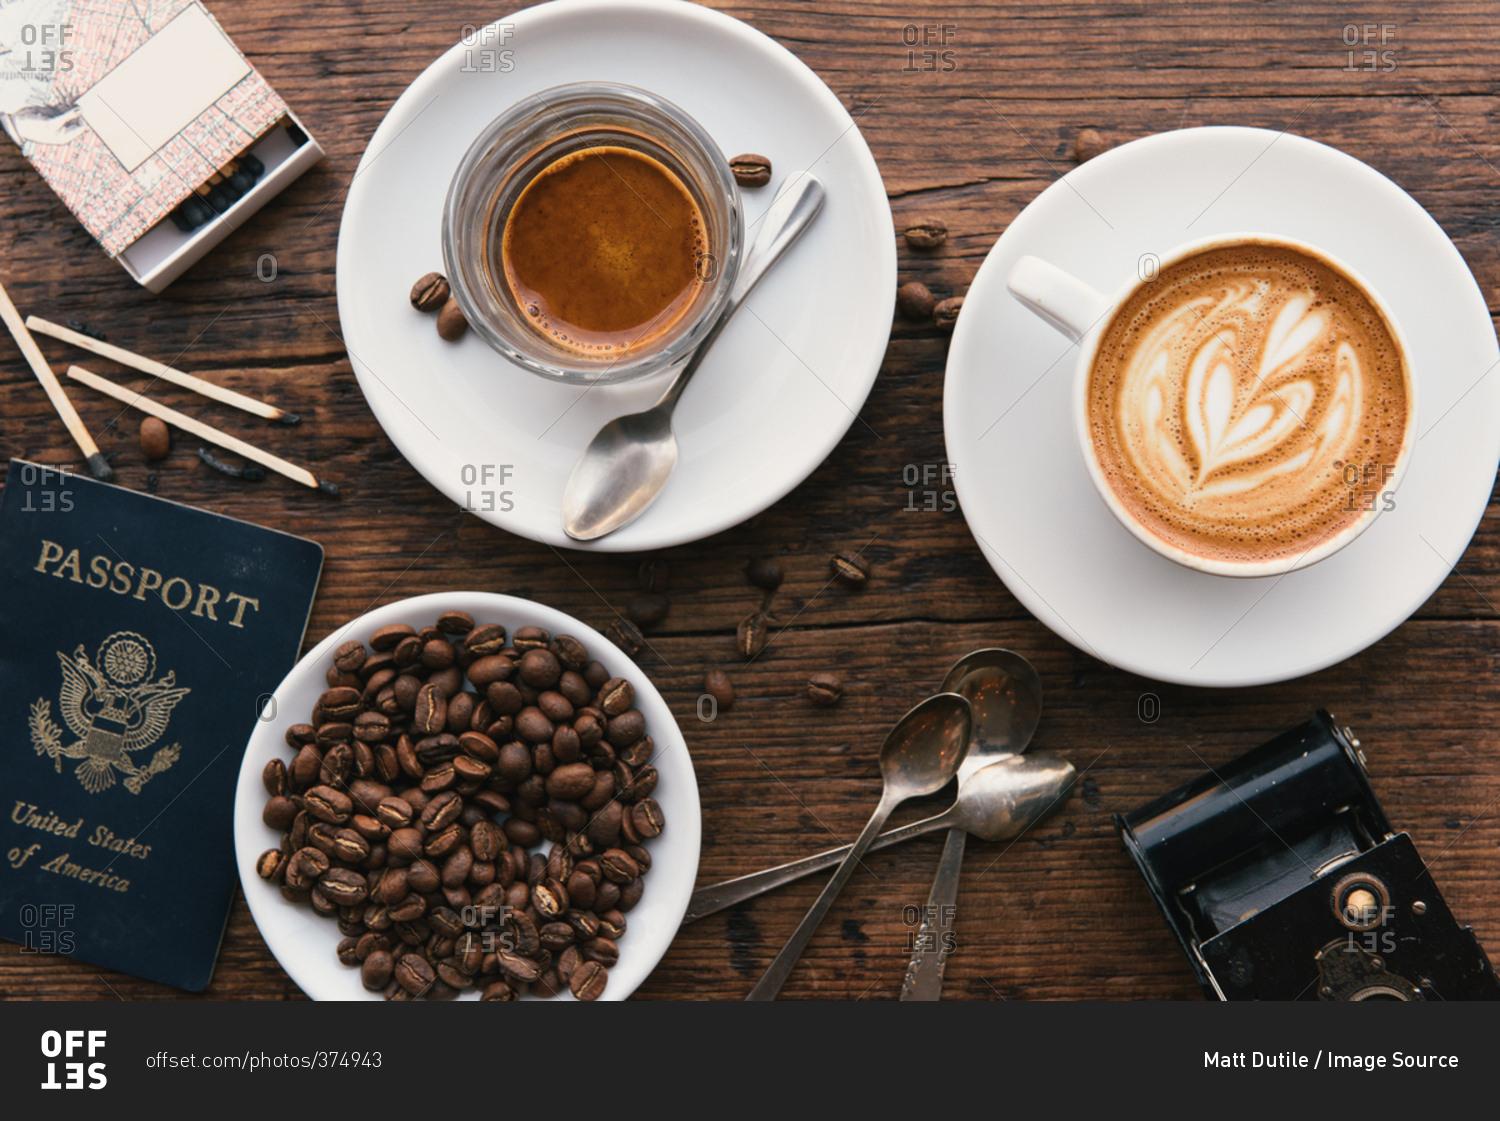 Overhead view of coffee's, coffee beans and American passport on coffee shop table